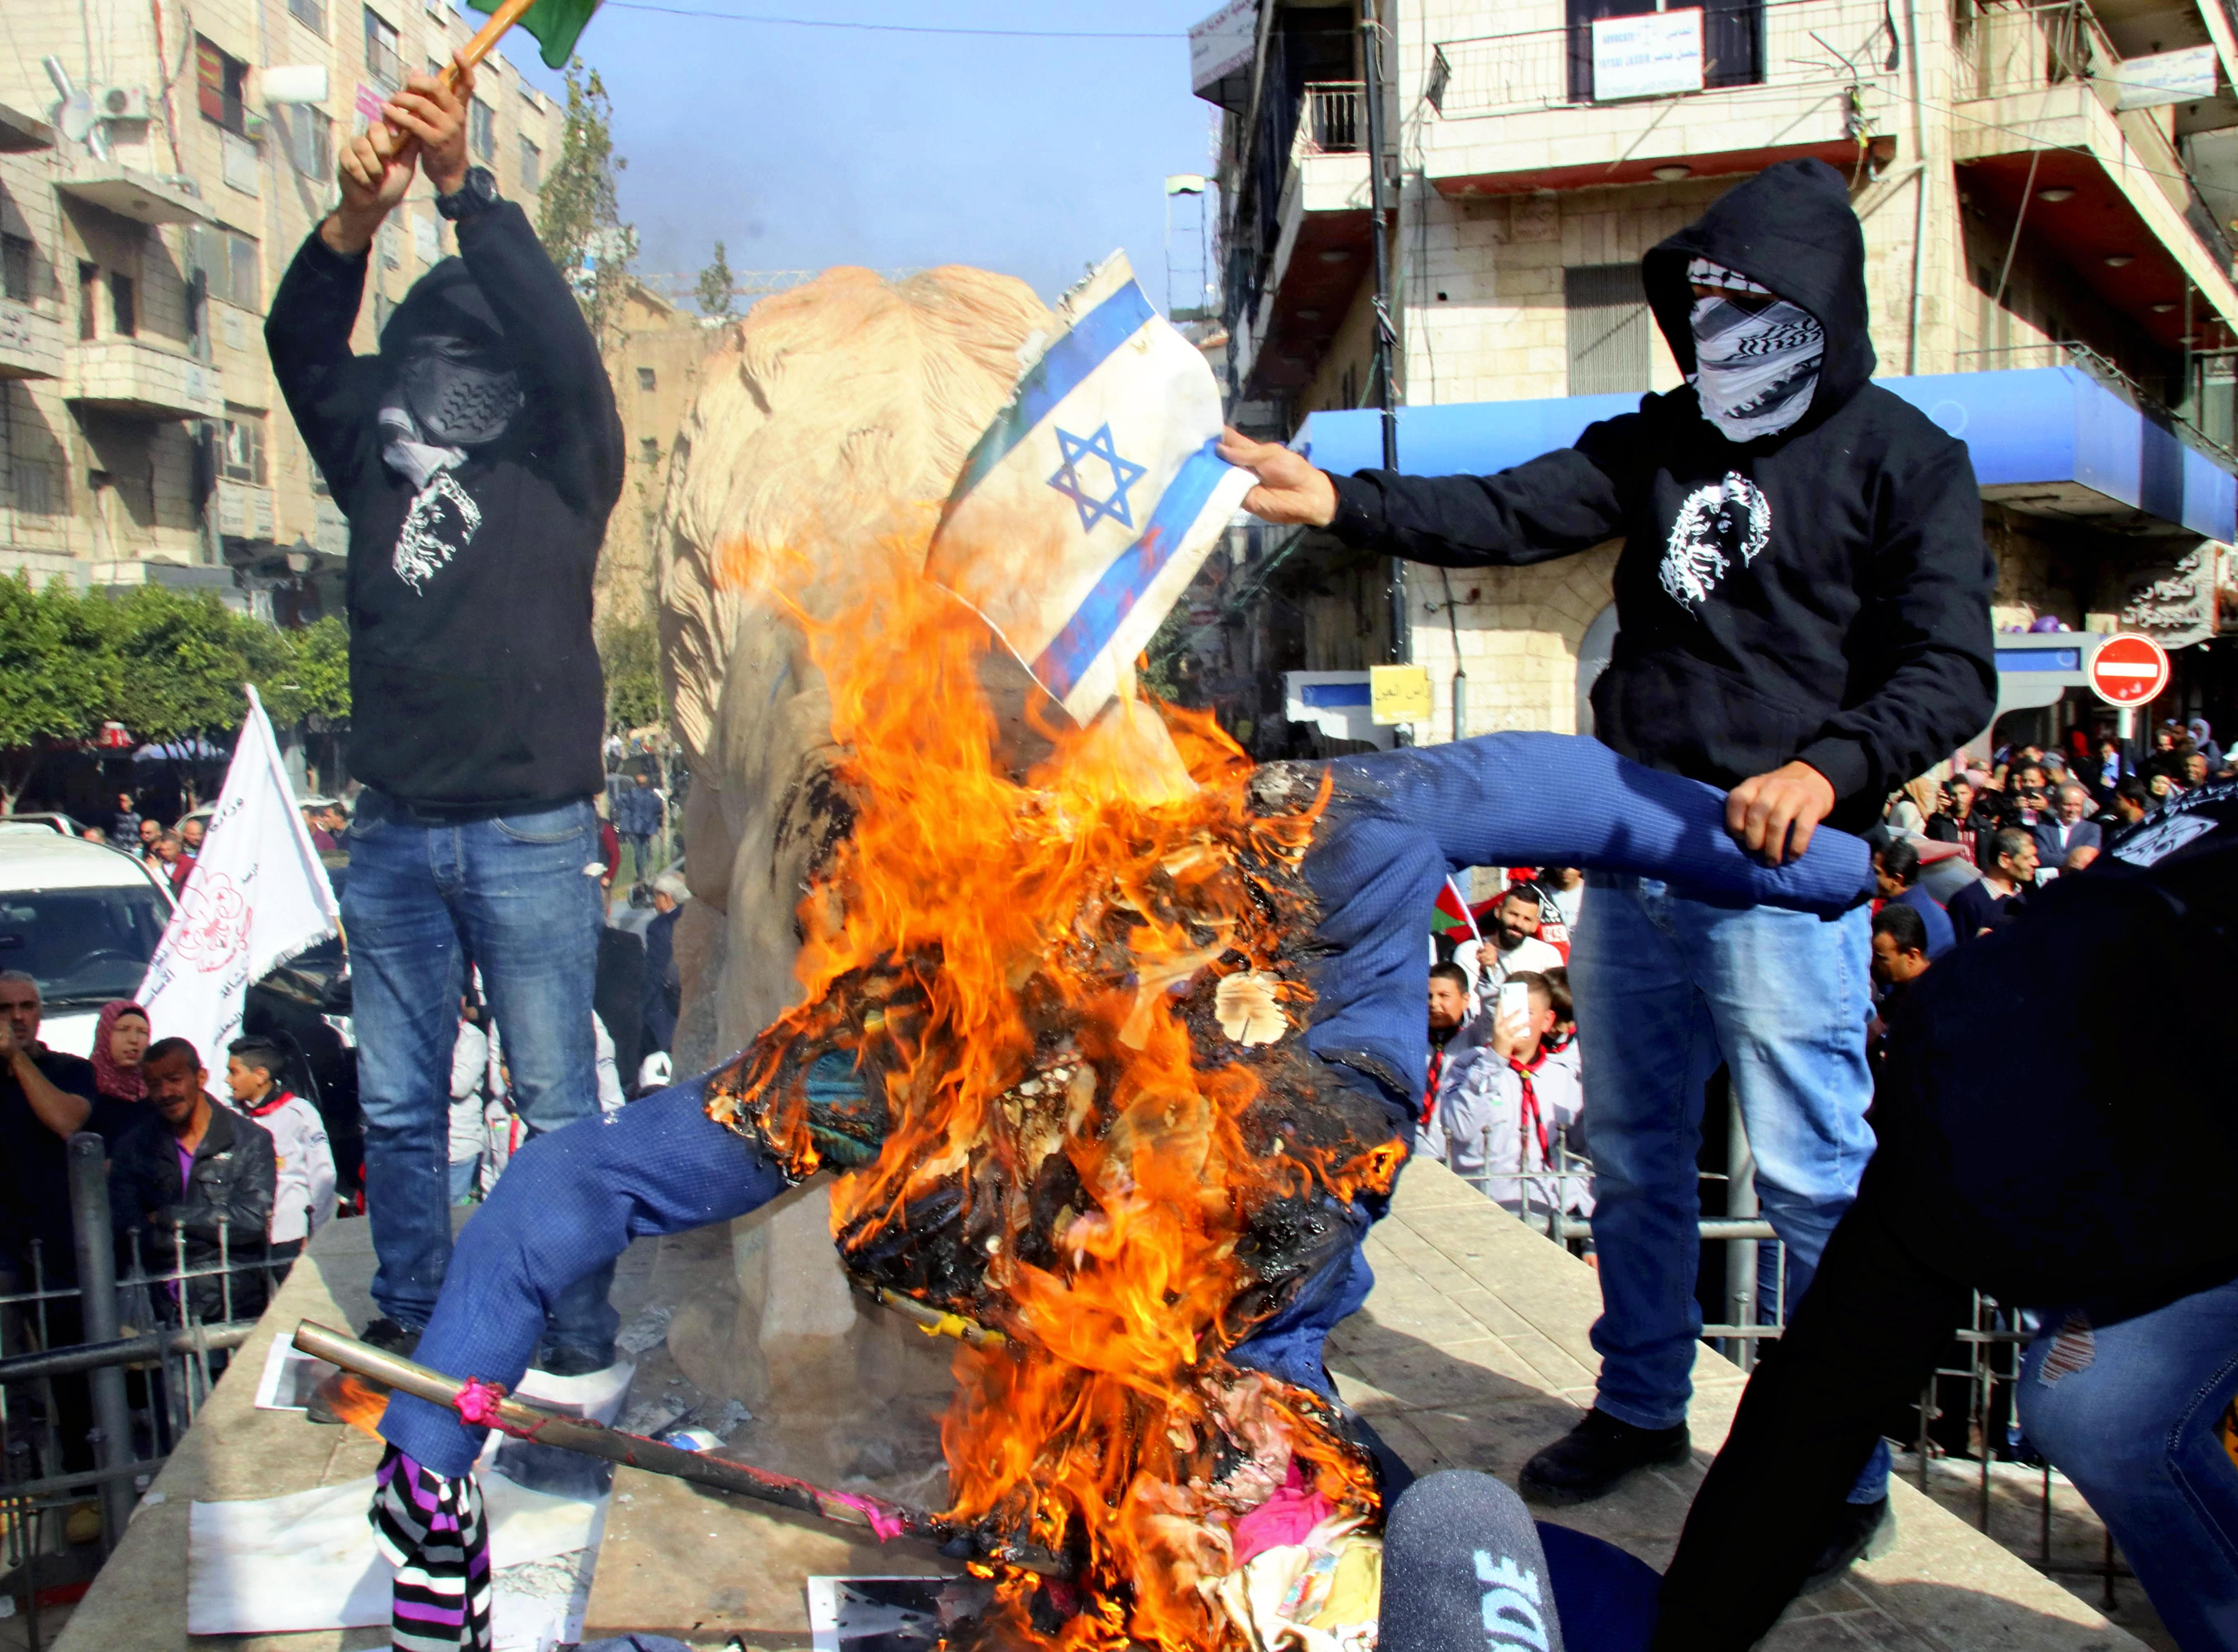 Palestinians protest as the Trump administration's decided to treat Israel's settlement enterprise as a legal endeavor in Ramallah on Nov. 26, 2019.( The Yomiuri Shimbun via AP Images )